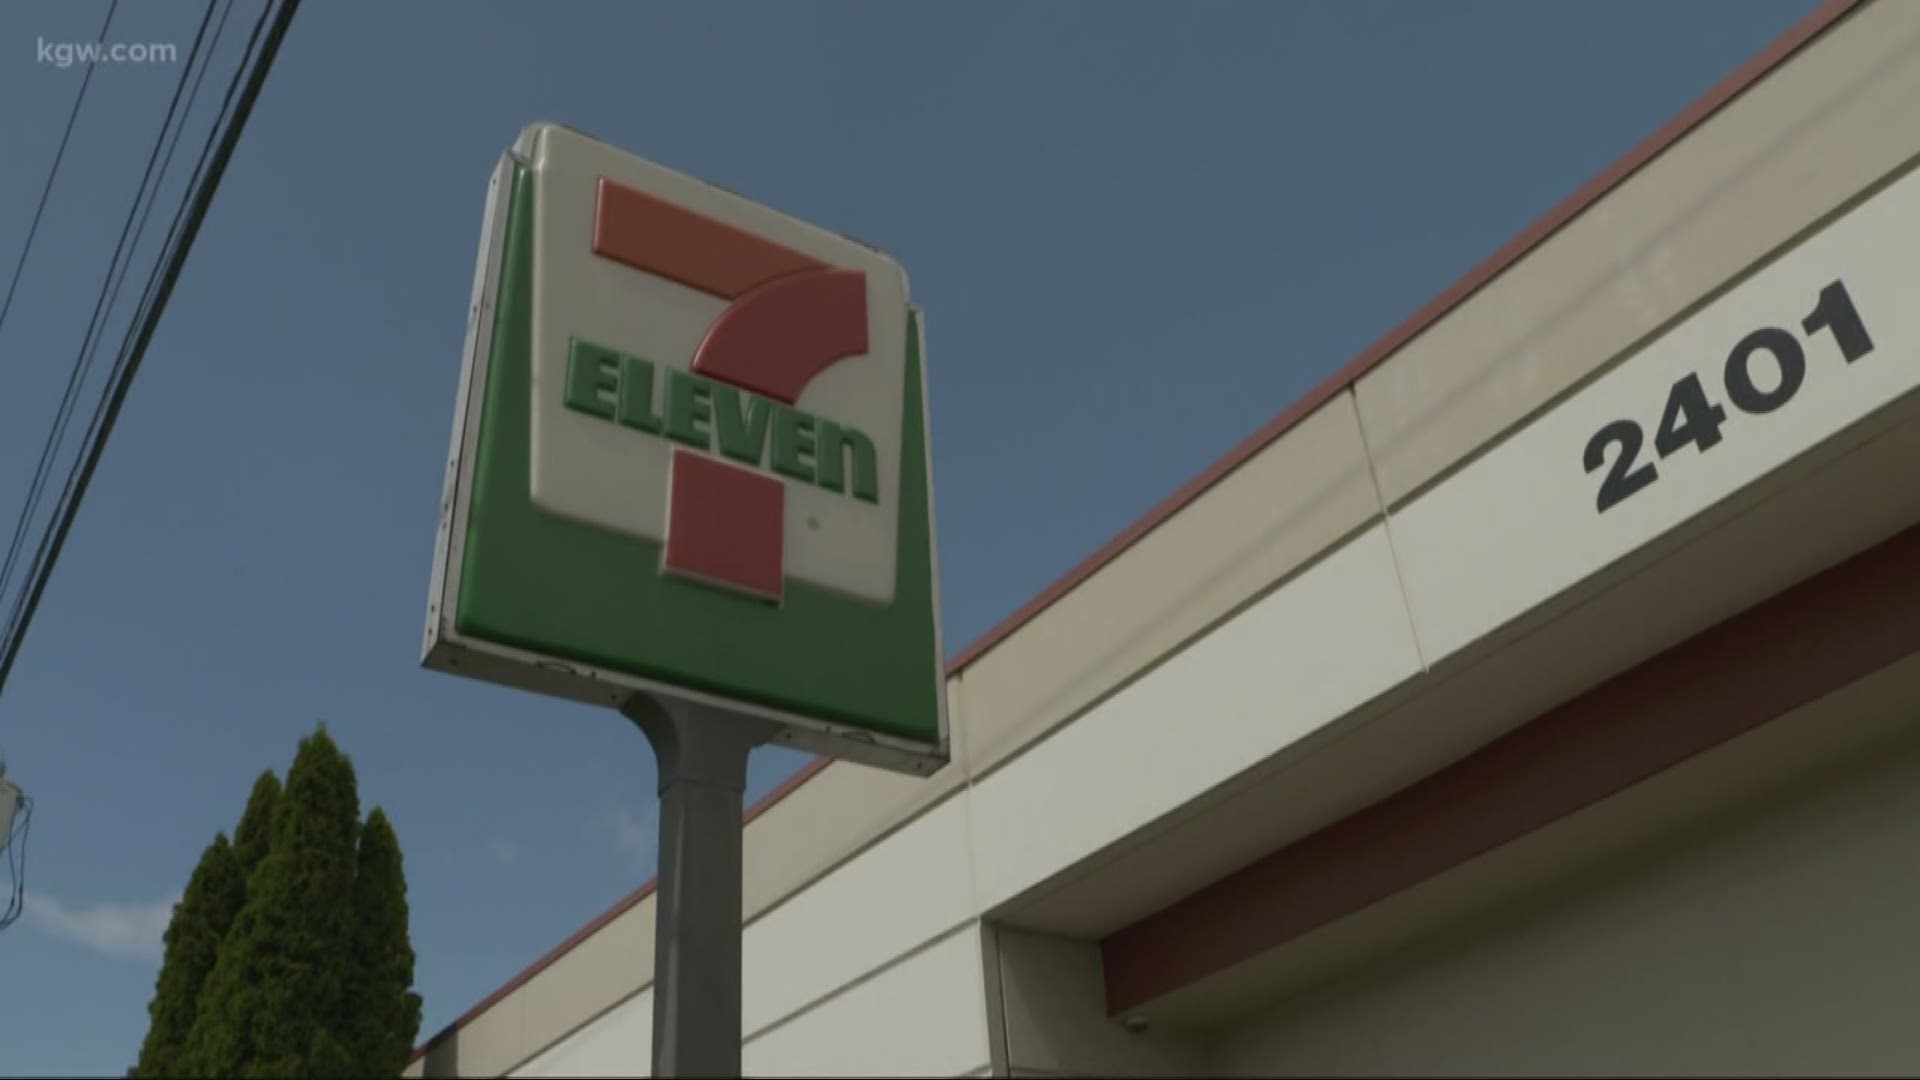 Undercover inspectors caught 7-Eleven stores illegally selling tobacco products to minors 2,307 times since 2010